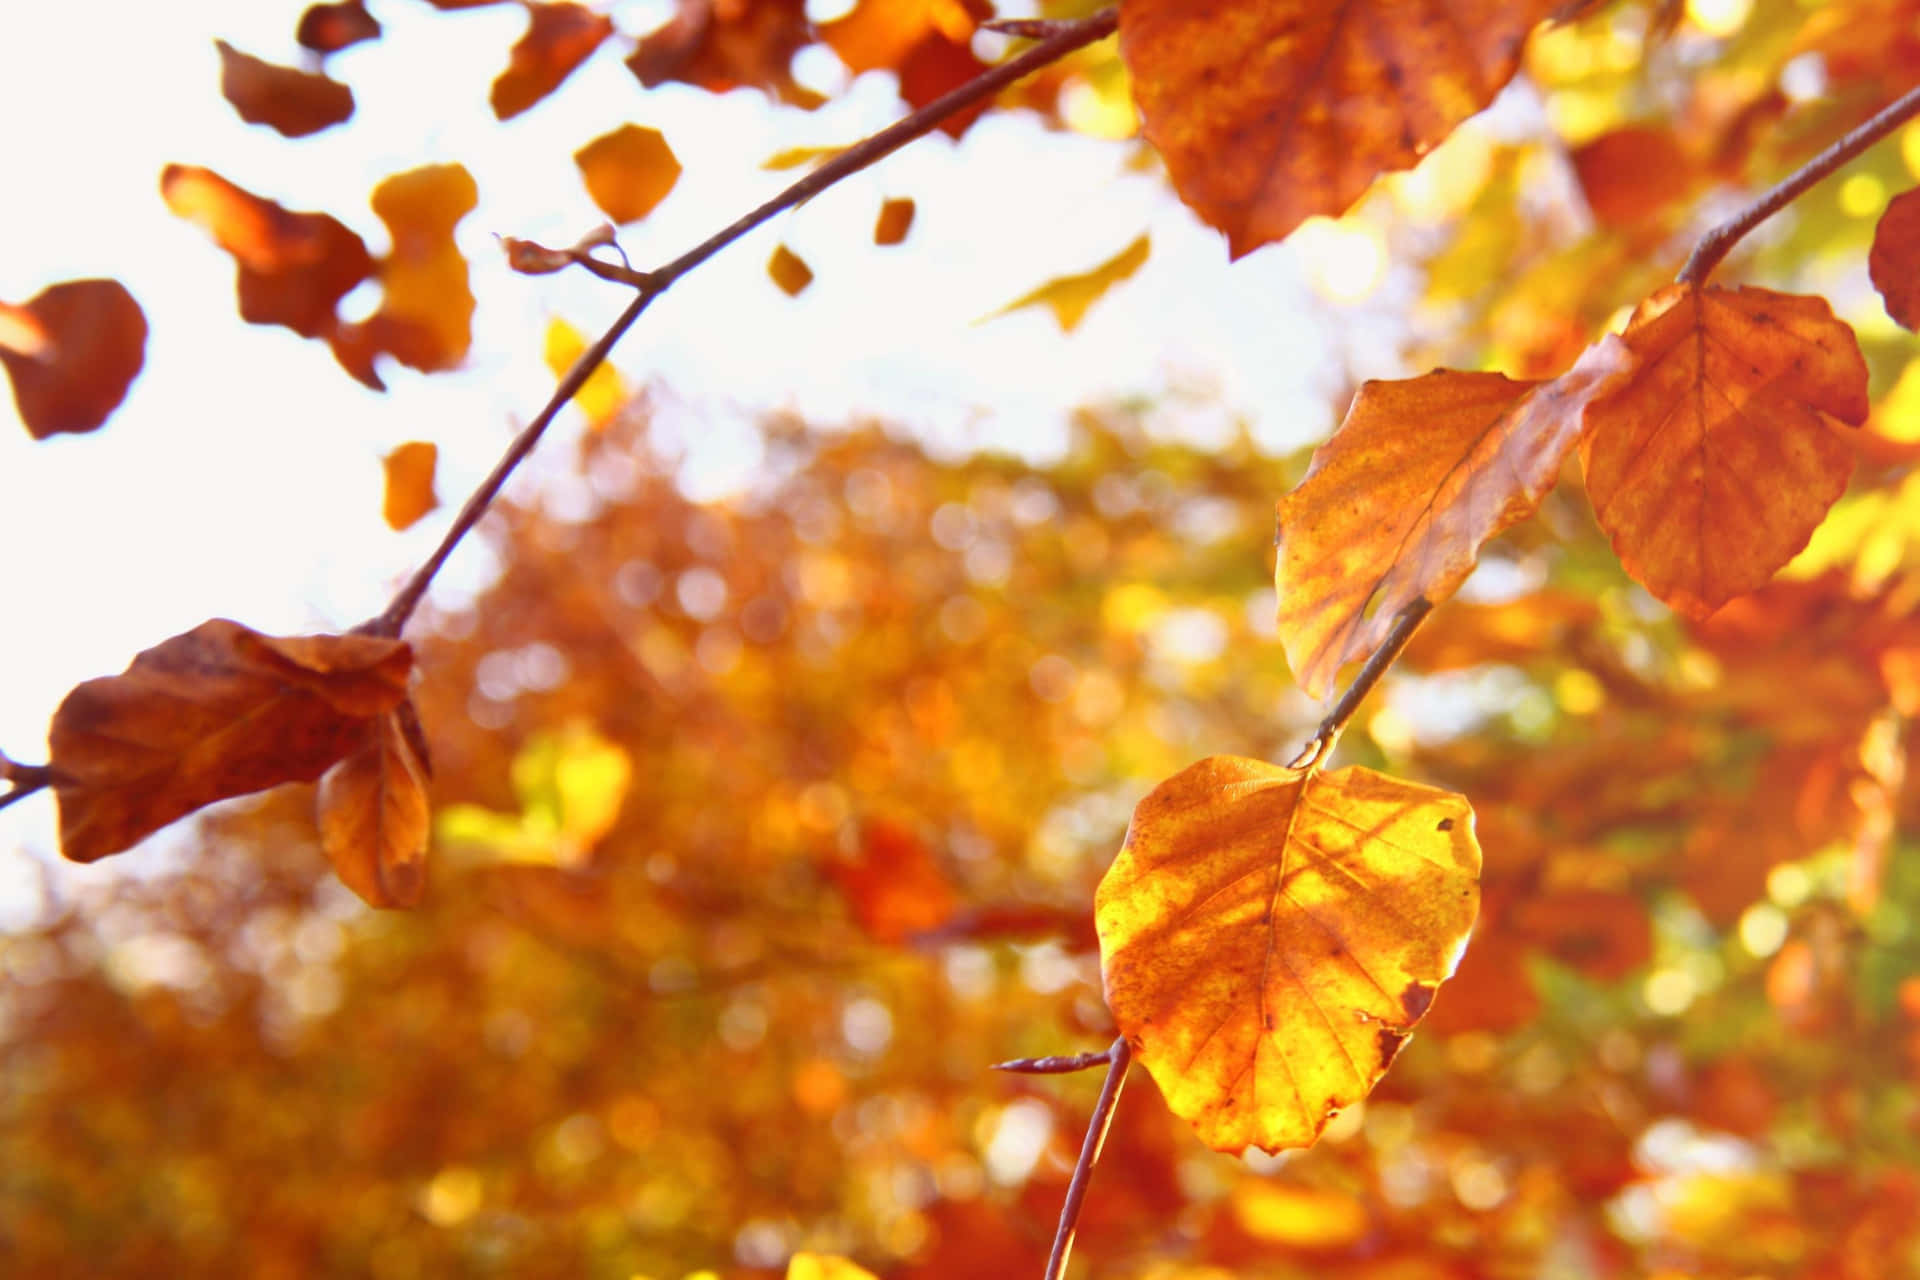 High Resolution Fall Background: A Tranquil Autumn Scene